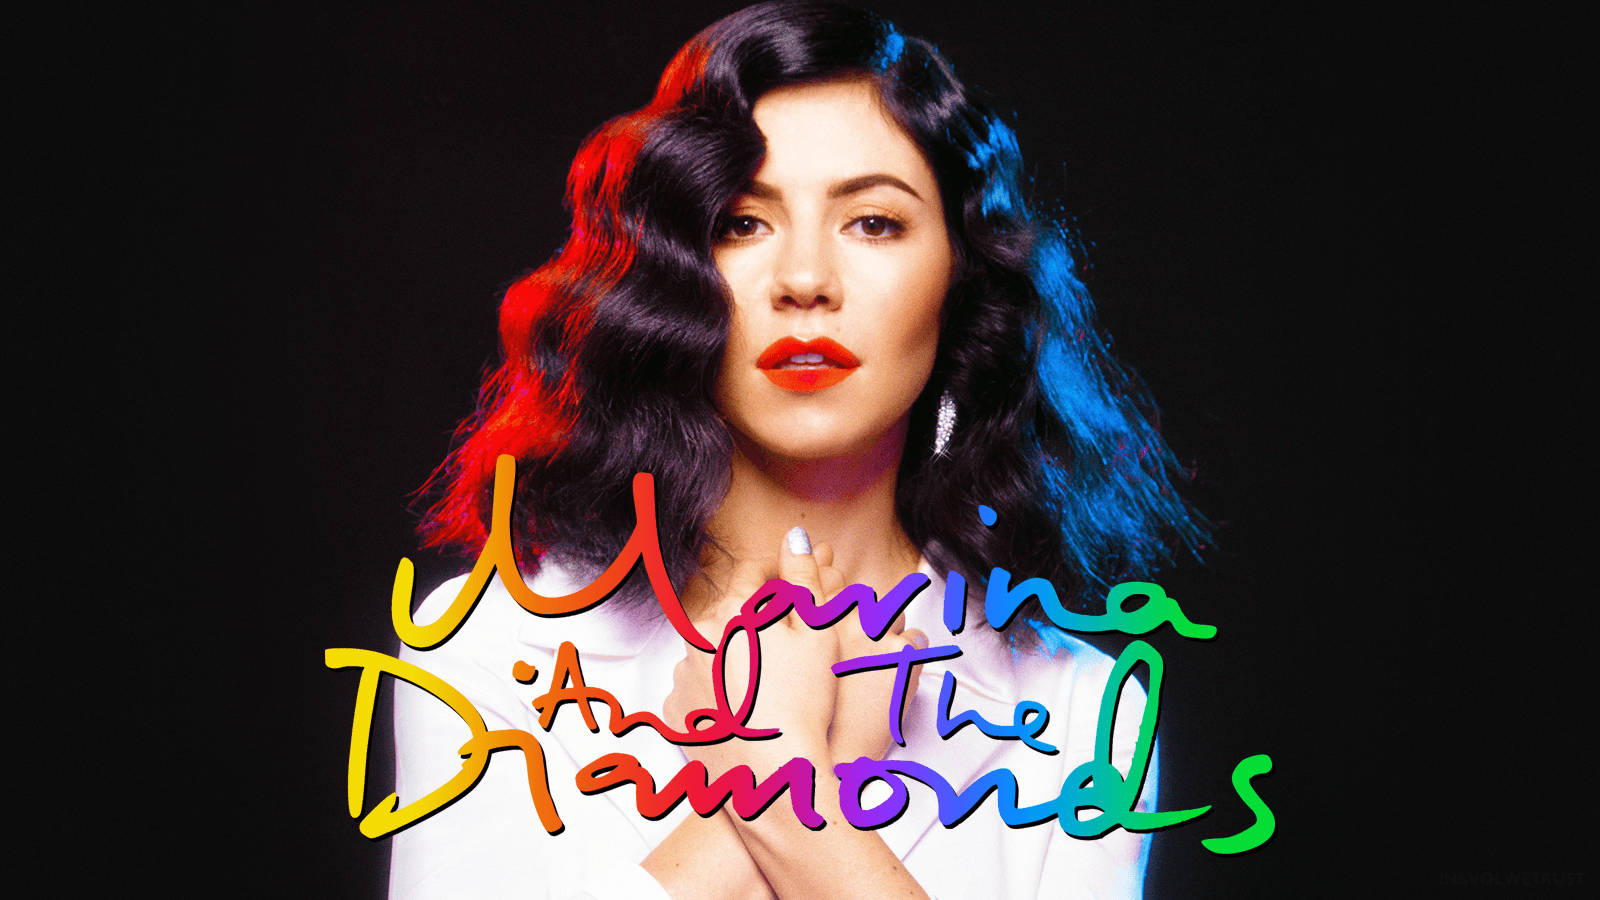 Marina And The Diamonds Froots Wallpaper